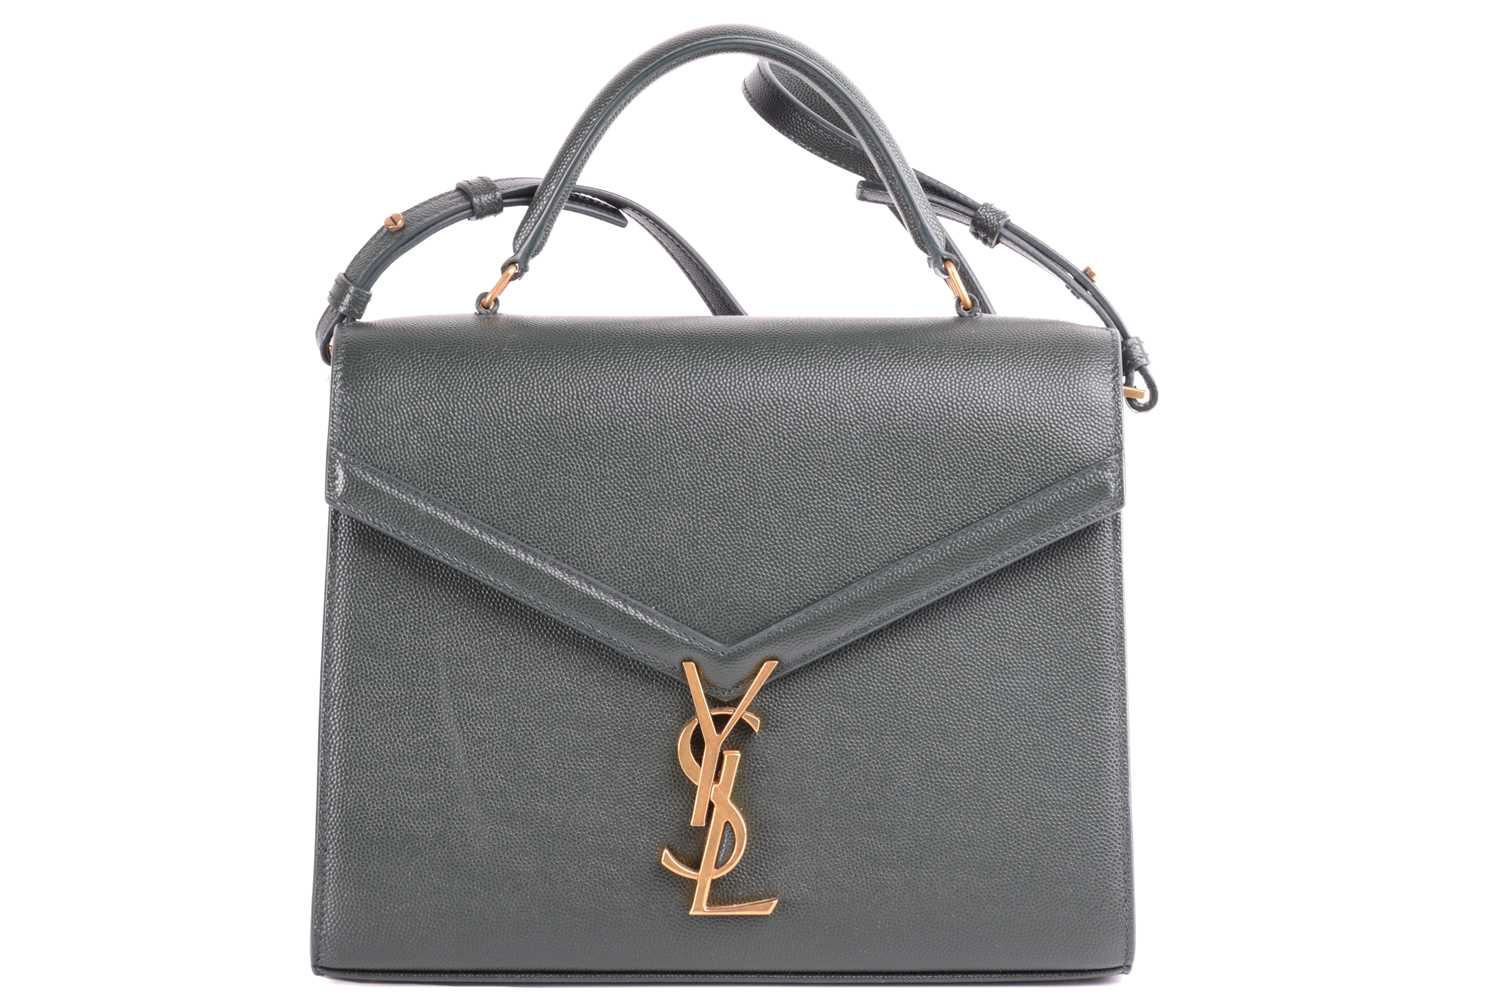 Yves Saint Laurent - a 'Cassandra' medium top handle in hunter green embossed leather, with front